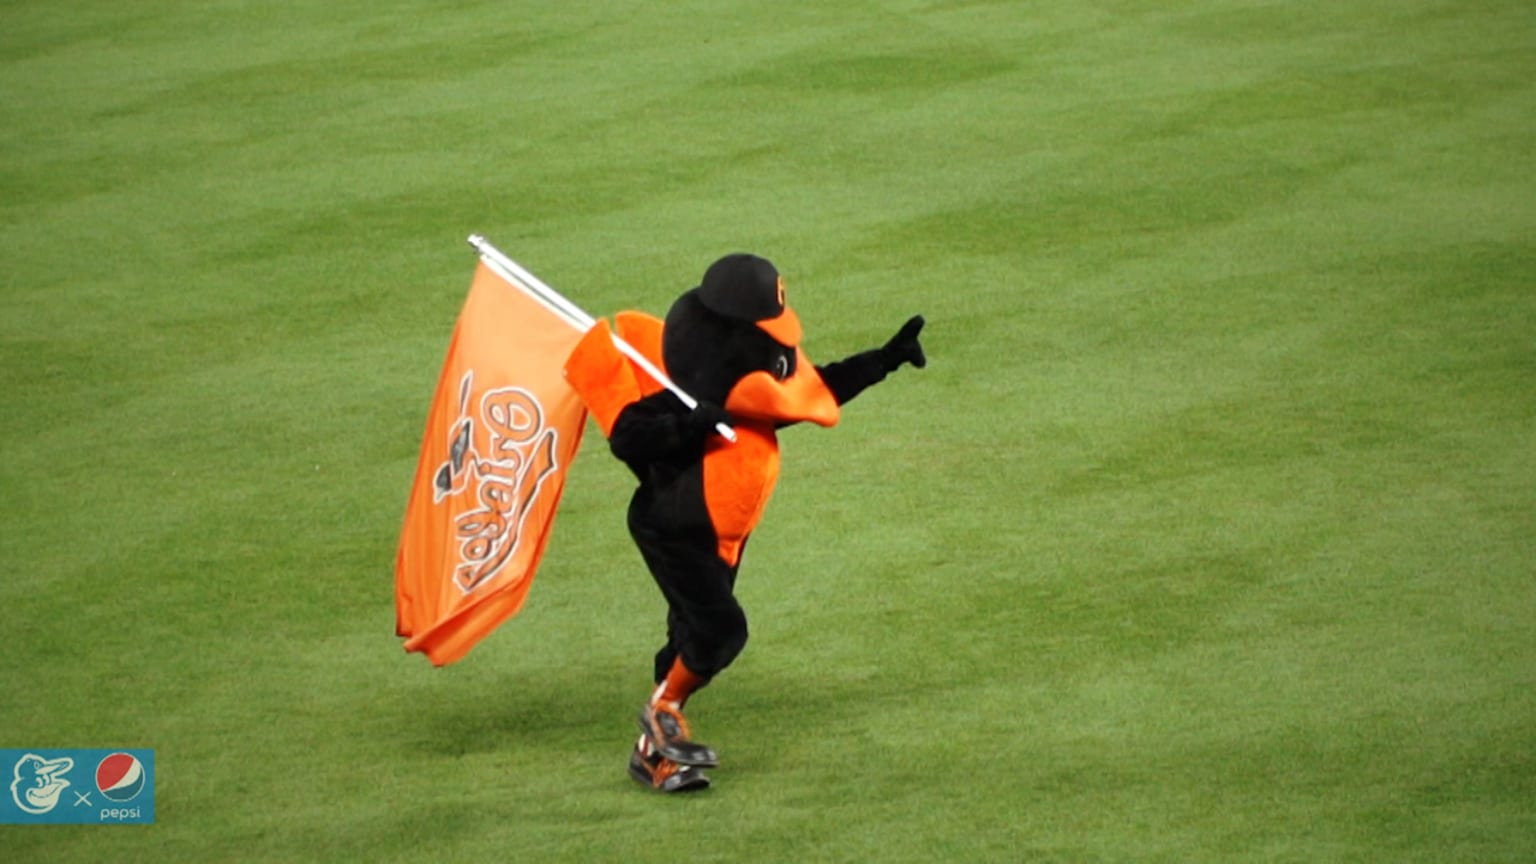 The Oriole Bird to join the Mascot Hall of Fame - WTOP News